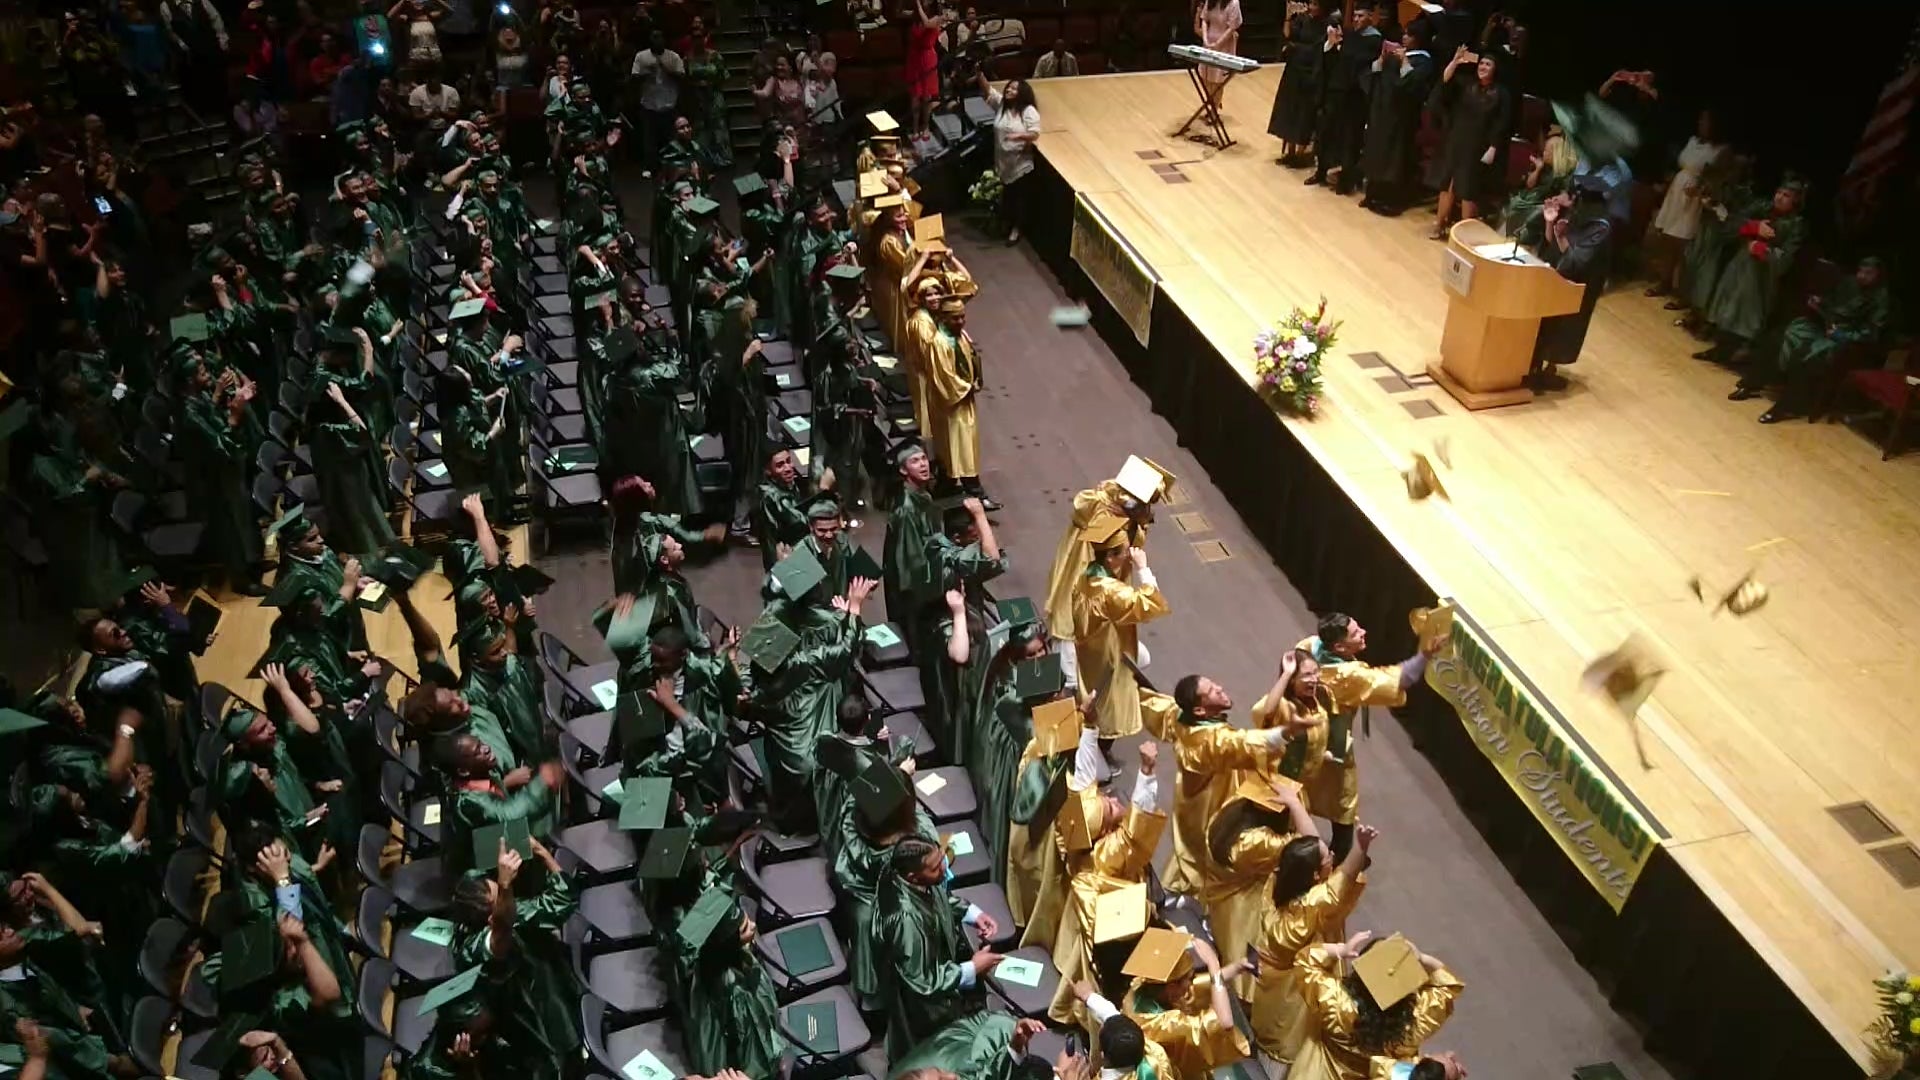 Edison students throw their caps in the air as their rite of passage is made official. Savannah (front row, middle) can be seen hugging a classmate. (Kevin McCorry/WHYY)